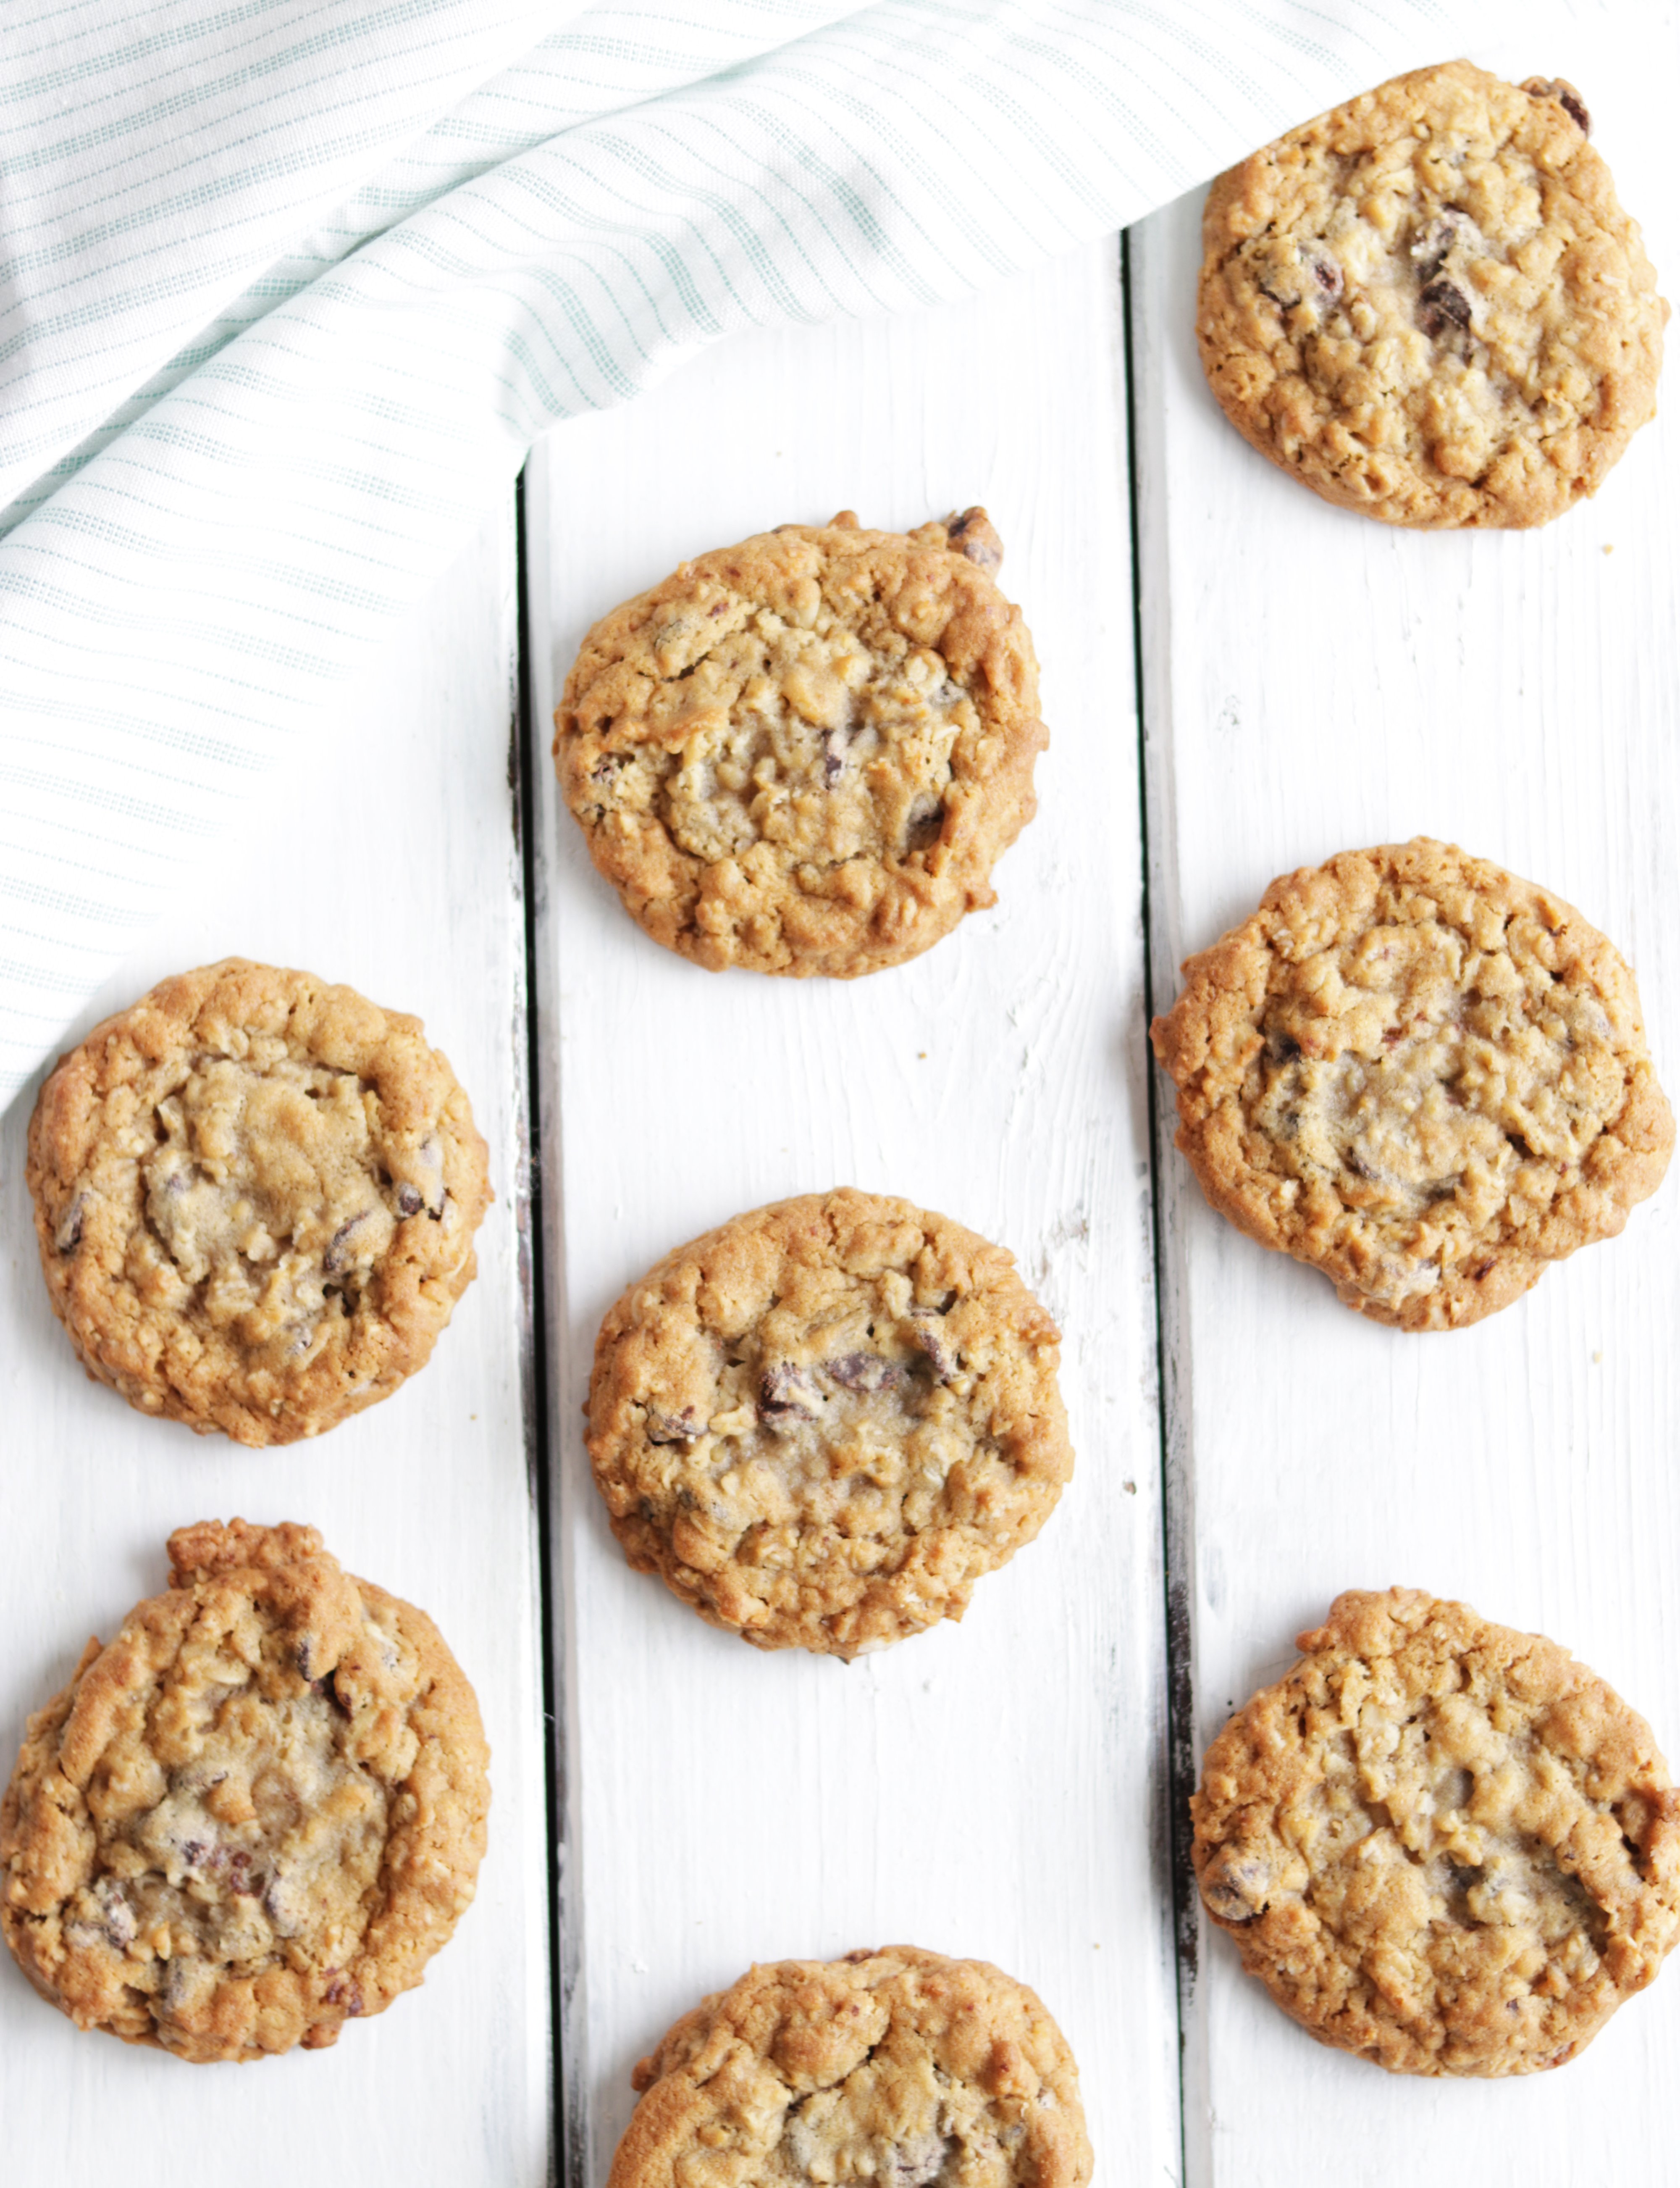 These easy chocolate chip oatmeal cookies are so soft and chewy, you'd never be able to tell that they're also gluten-free!